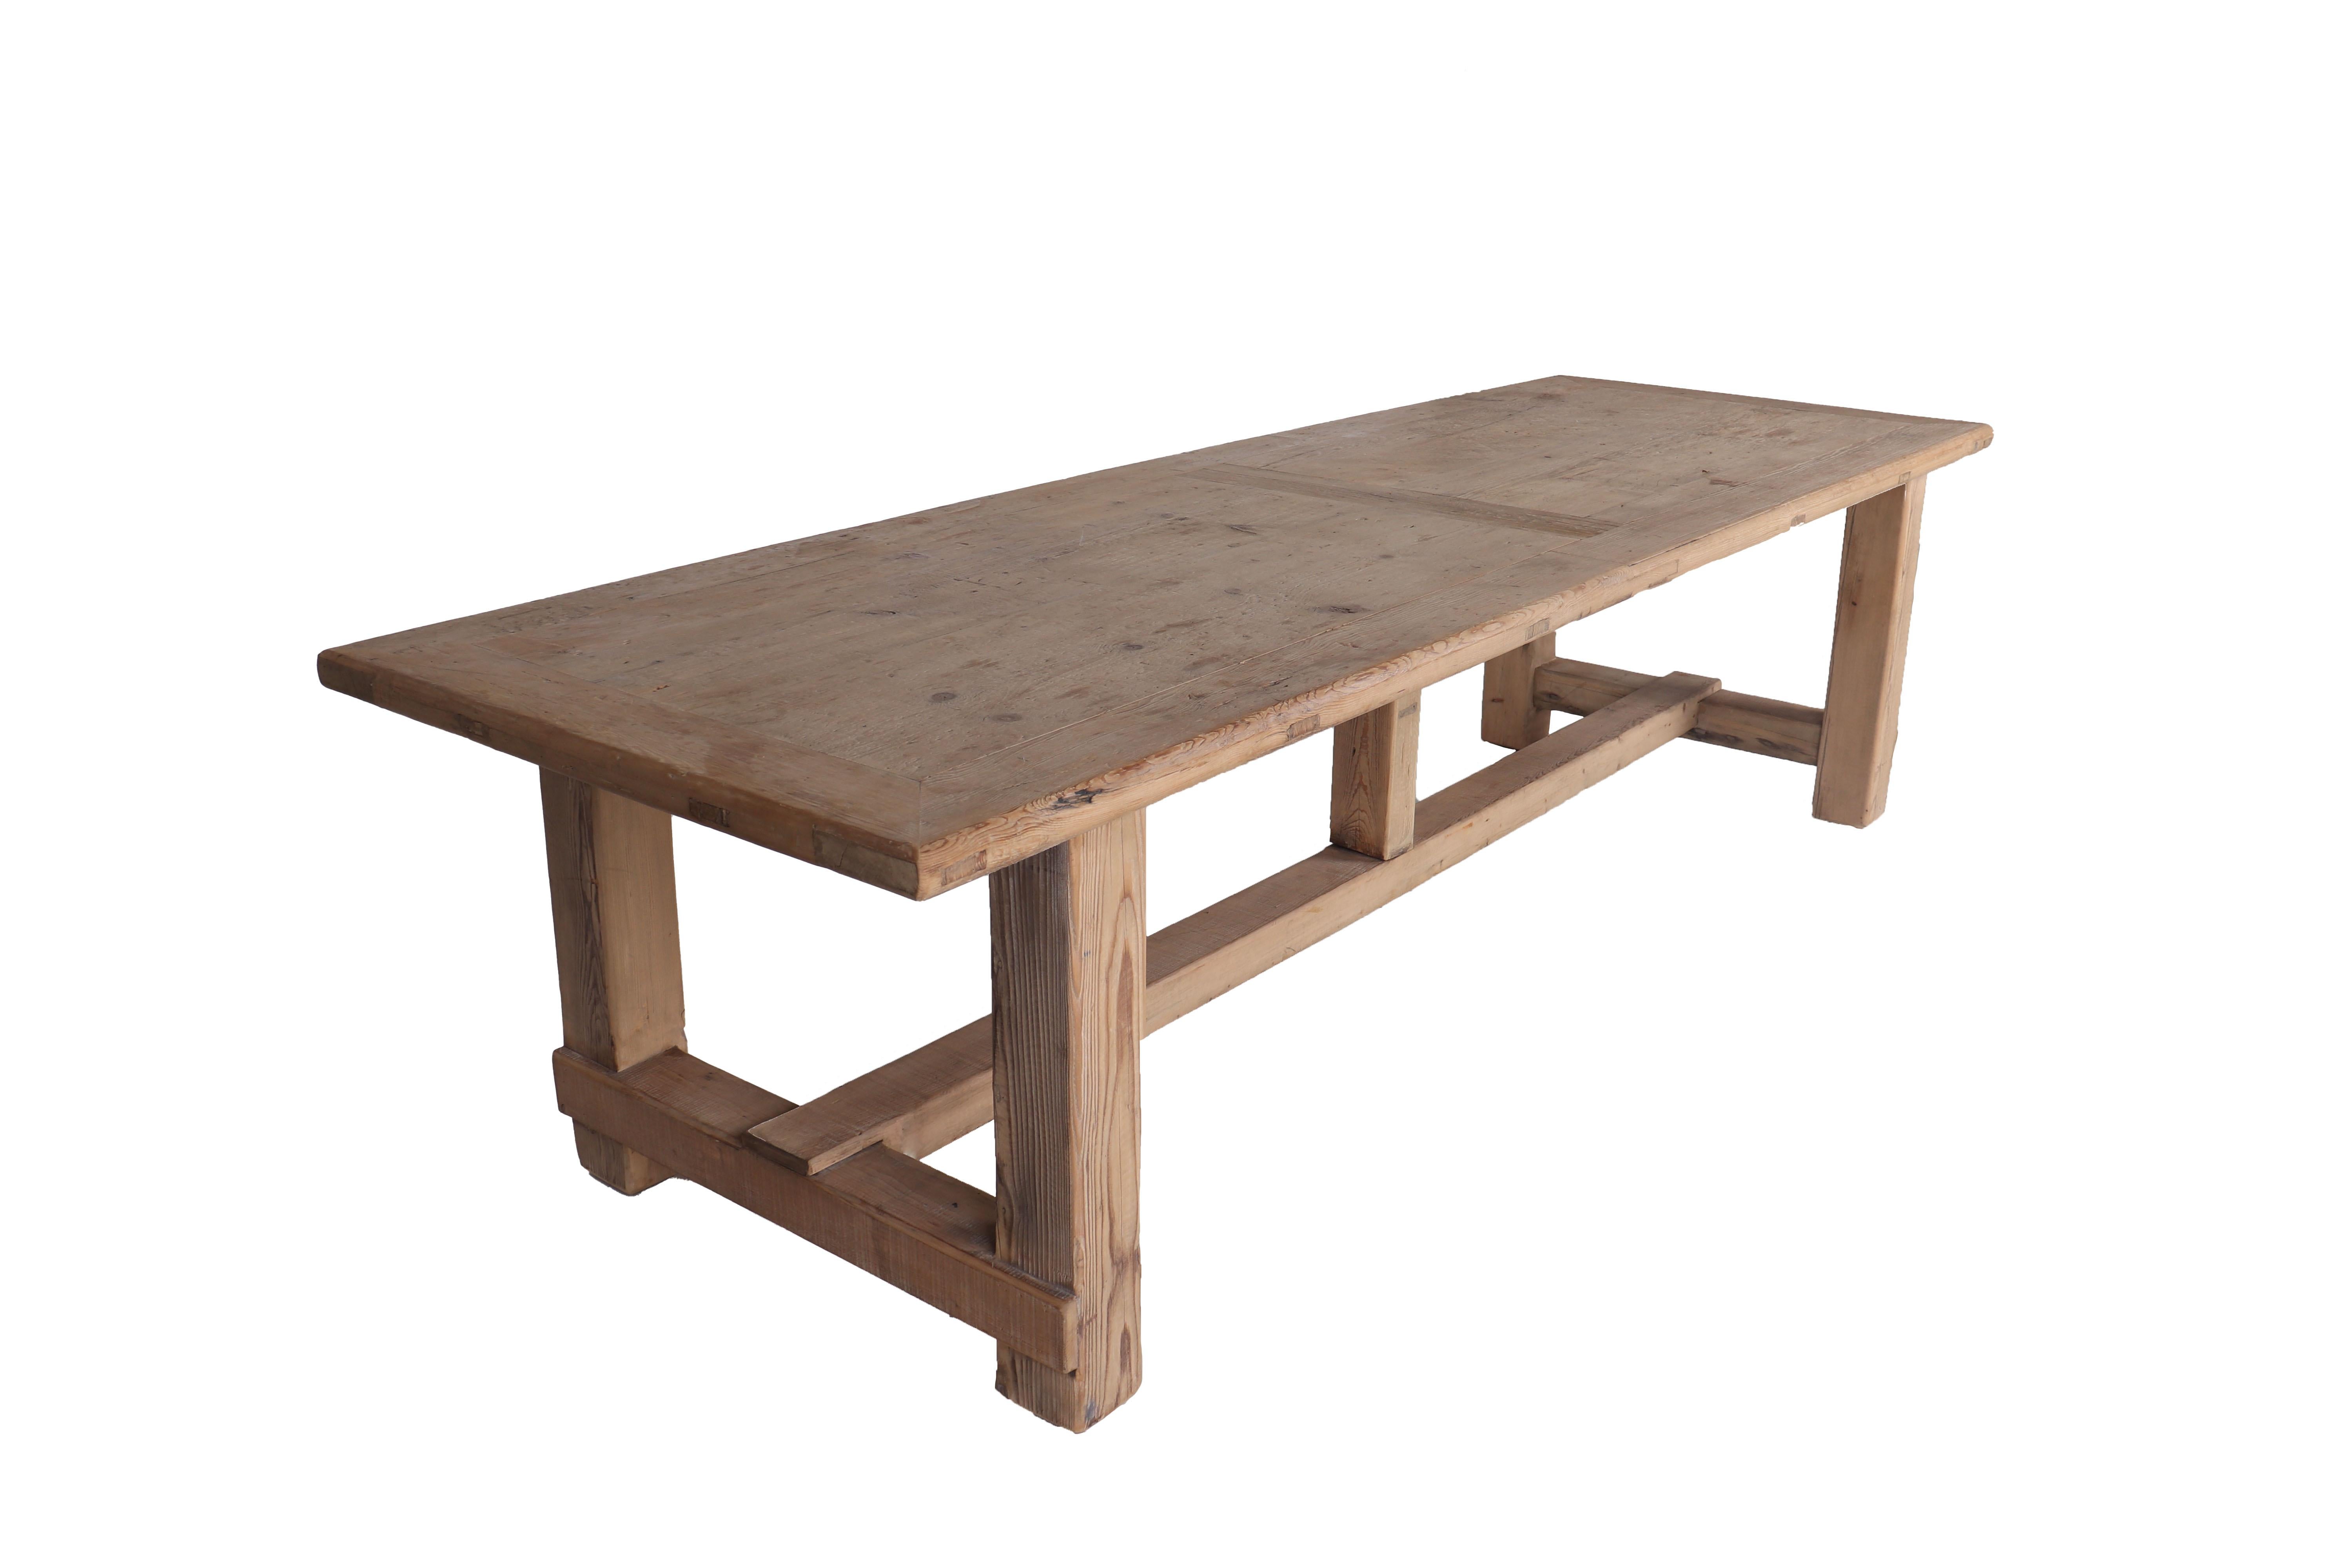 Napa farm table in reclaimed elm

One of hind table imported from Europe by our sourcing team.
  